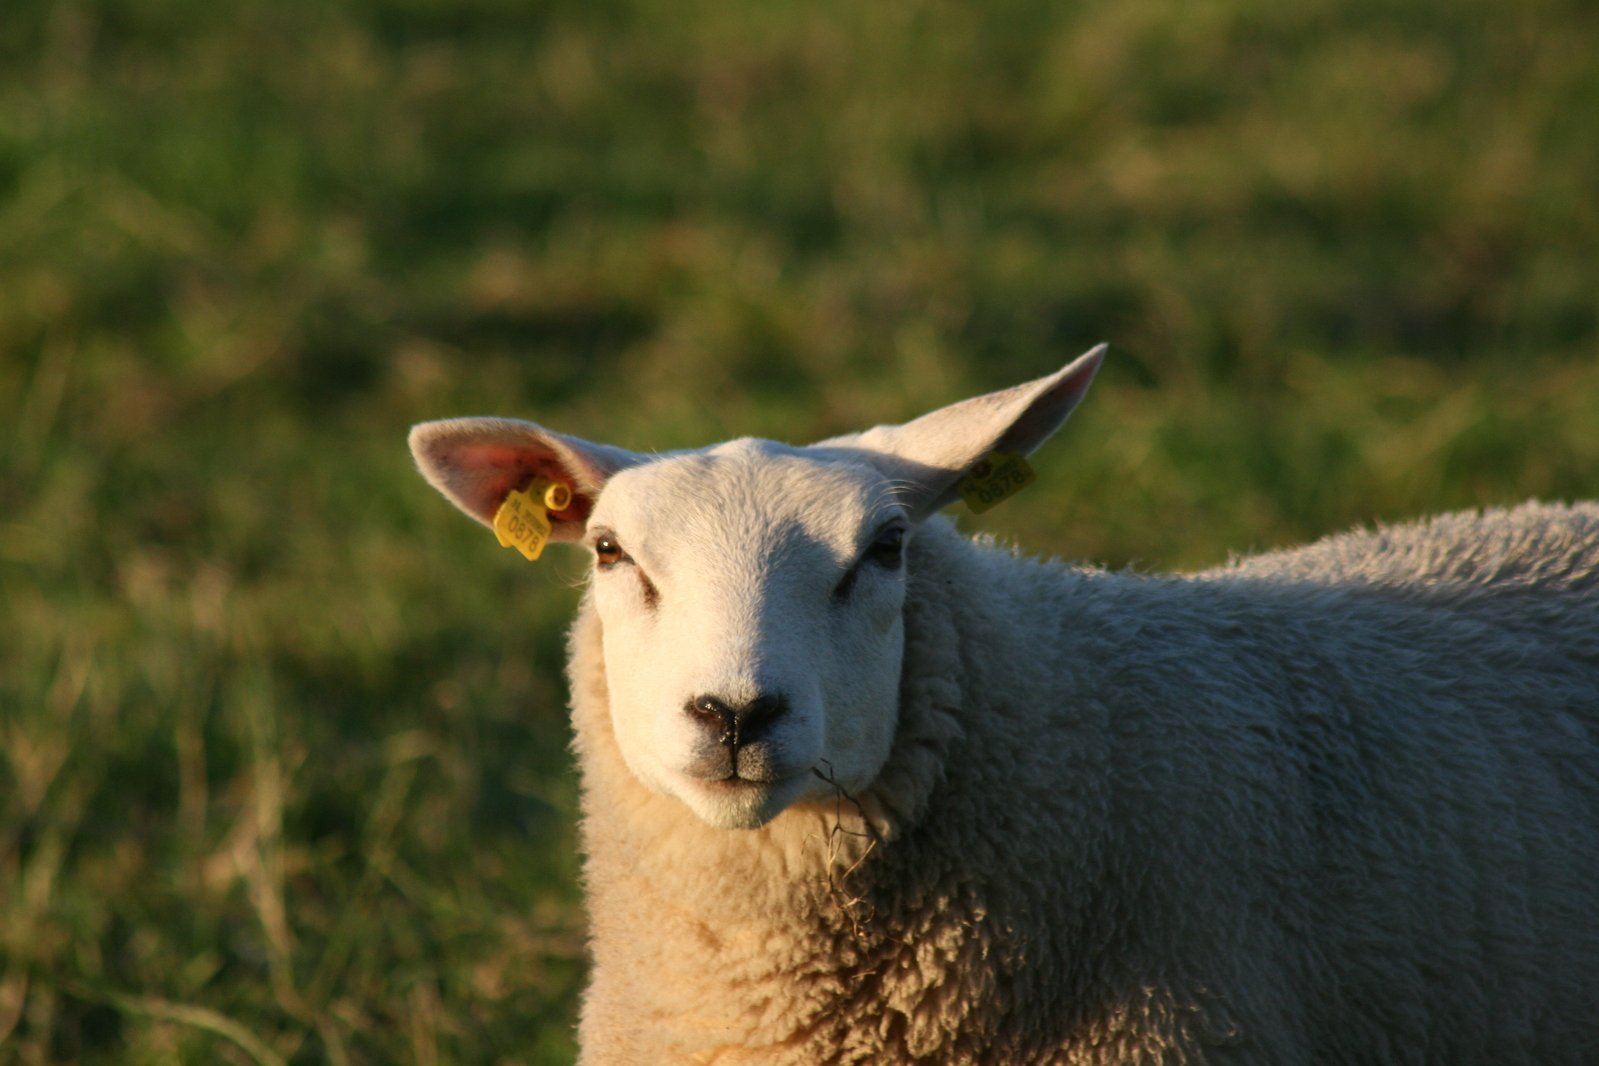 a sheep with a yellow ear tag in the grass